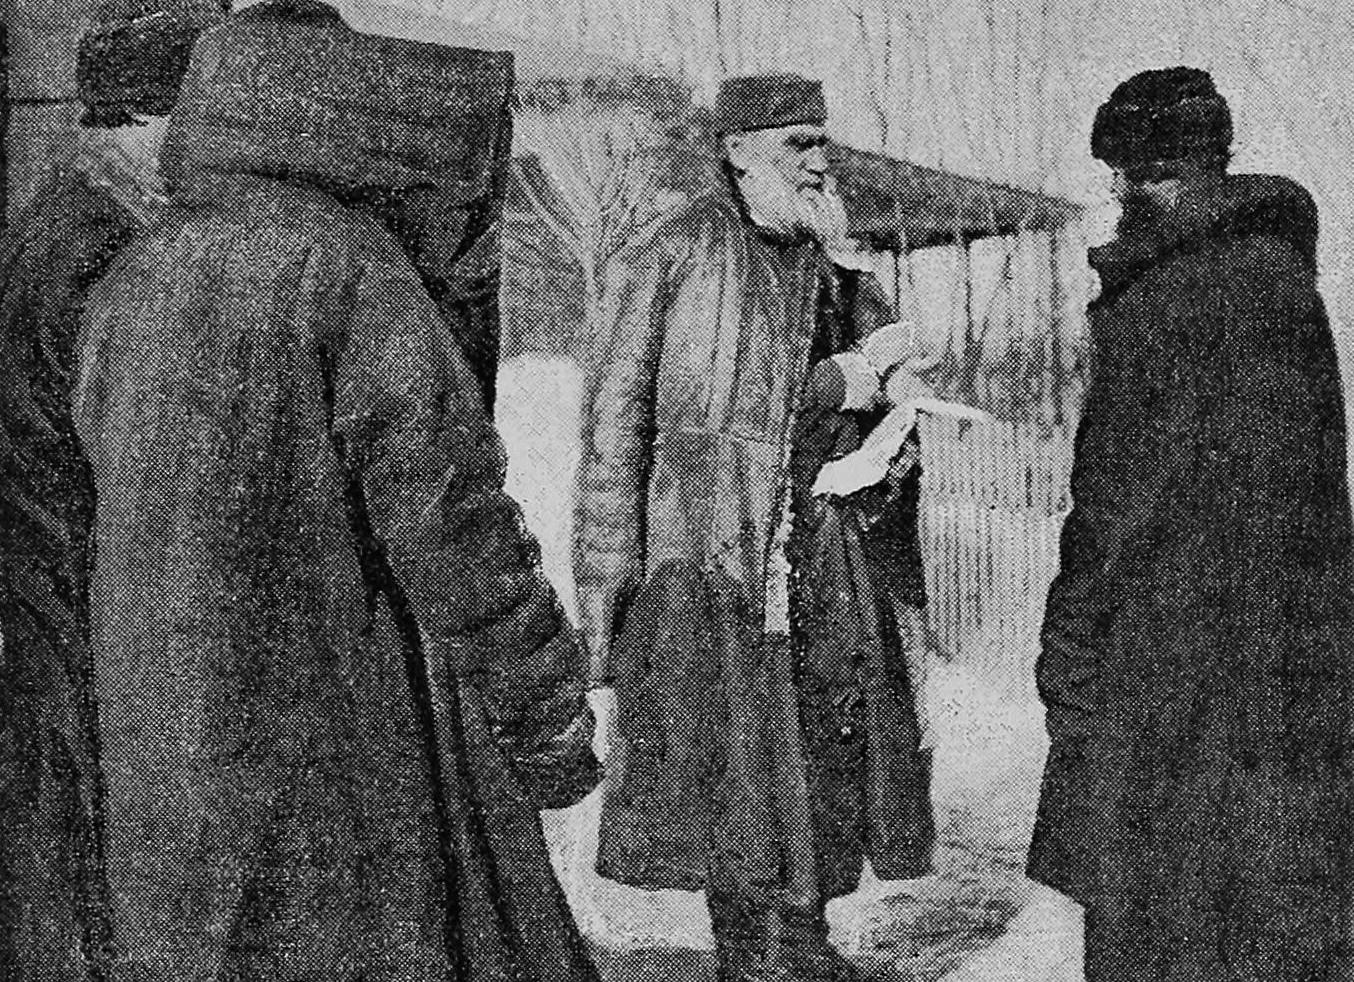 Tolstoy with a group of peasants.